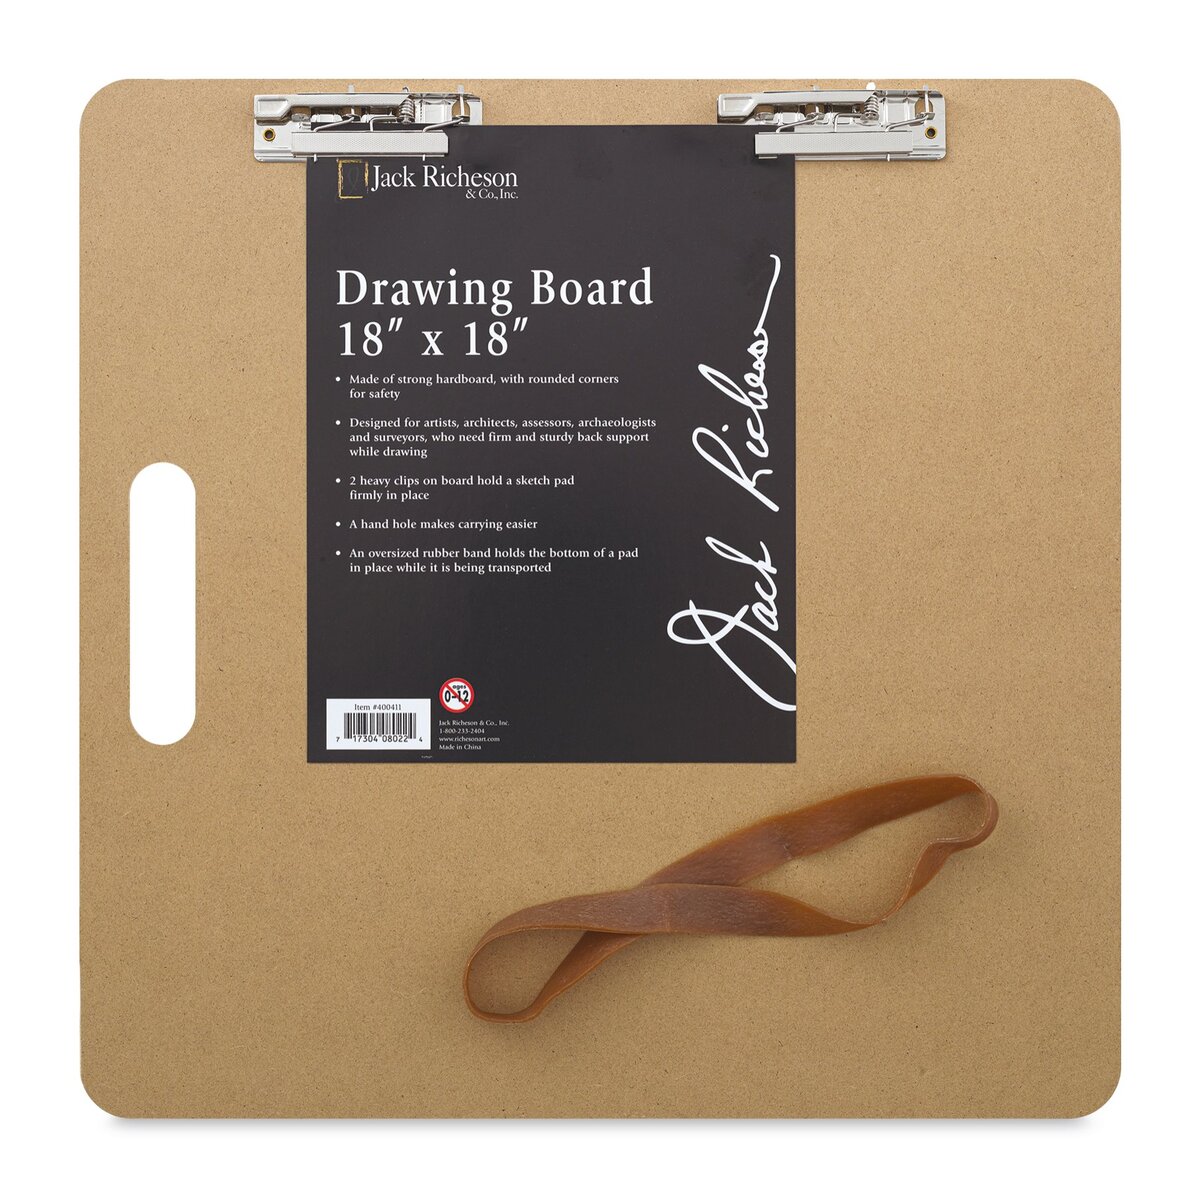 Acocony Drawing Board 17 x 24 Double Clip with Hardware Corner Guard Sketch Board Hardboard Drawing Boards for Artists Low Profile CL